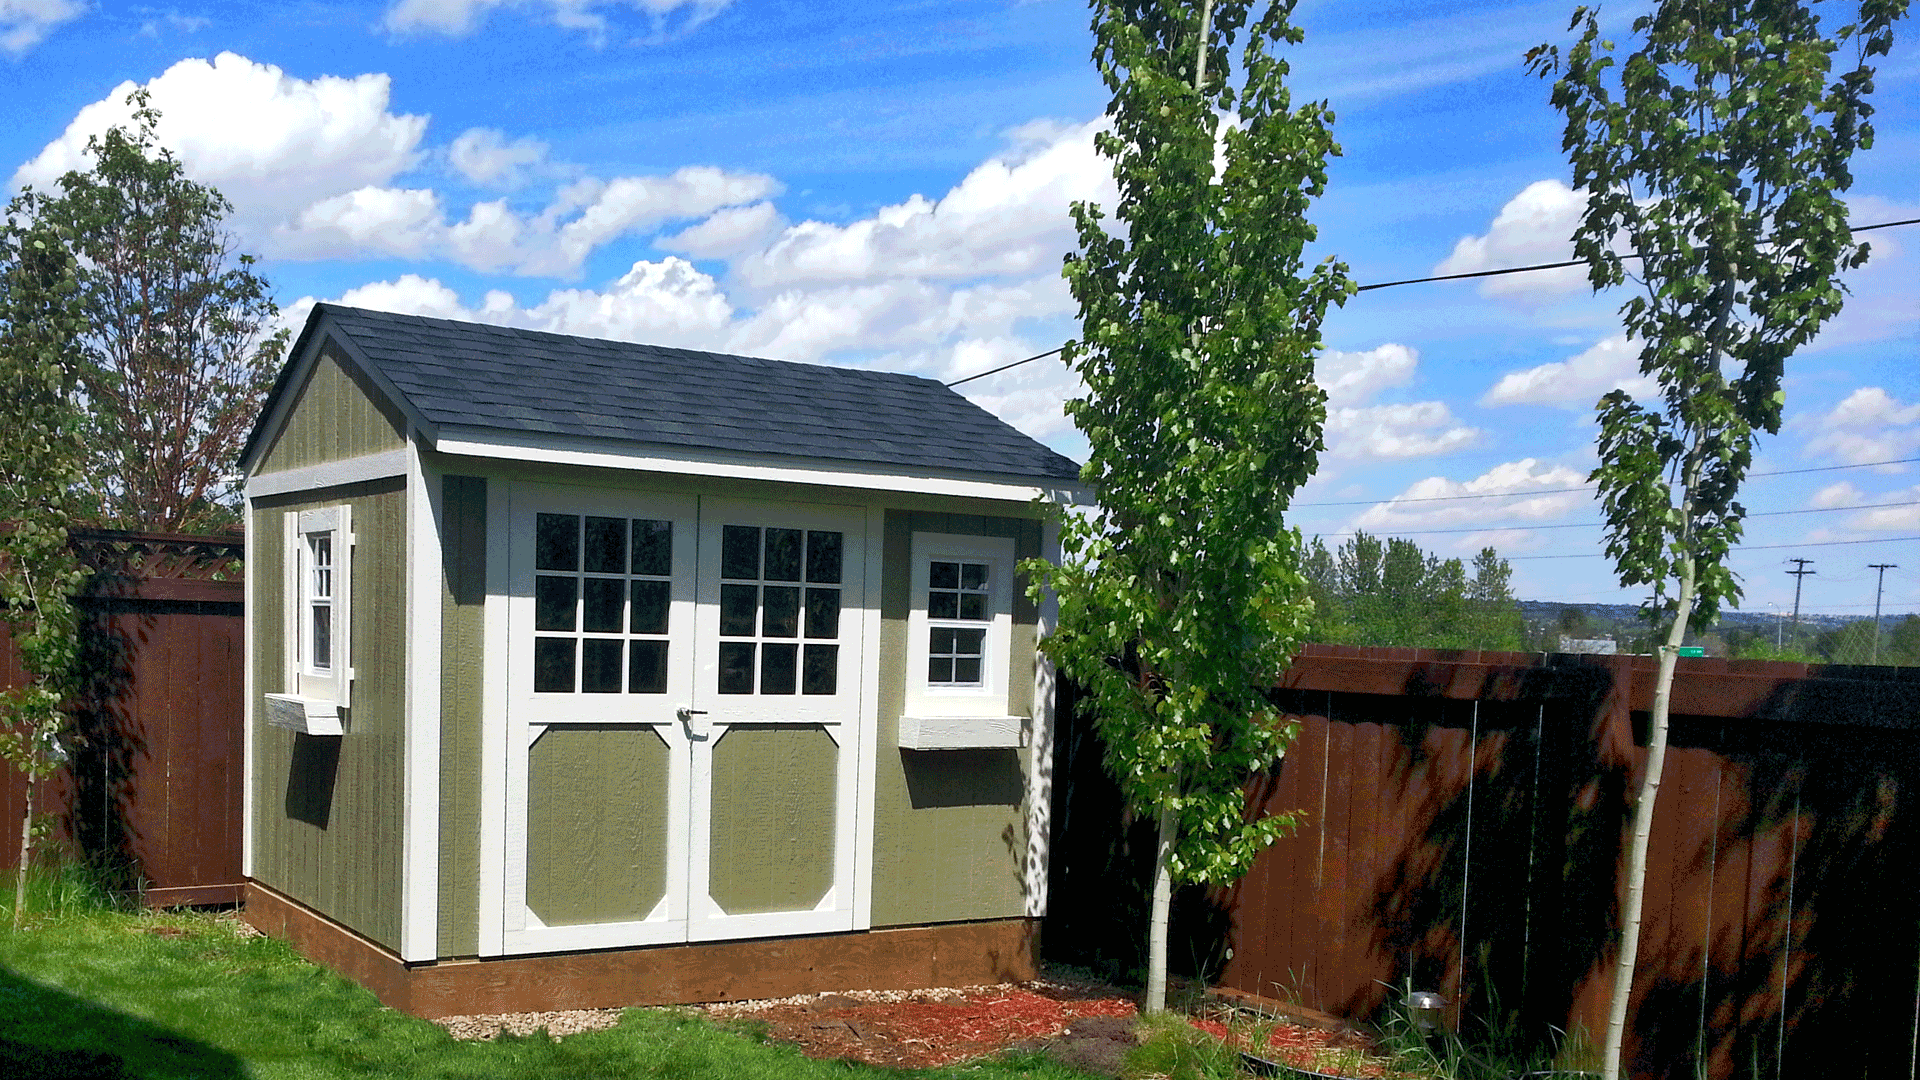 4' x 12' Garden Shed The Madison | Shed Solutions